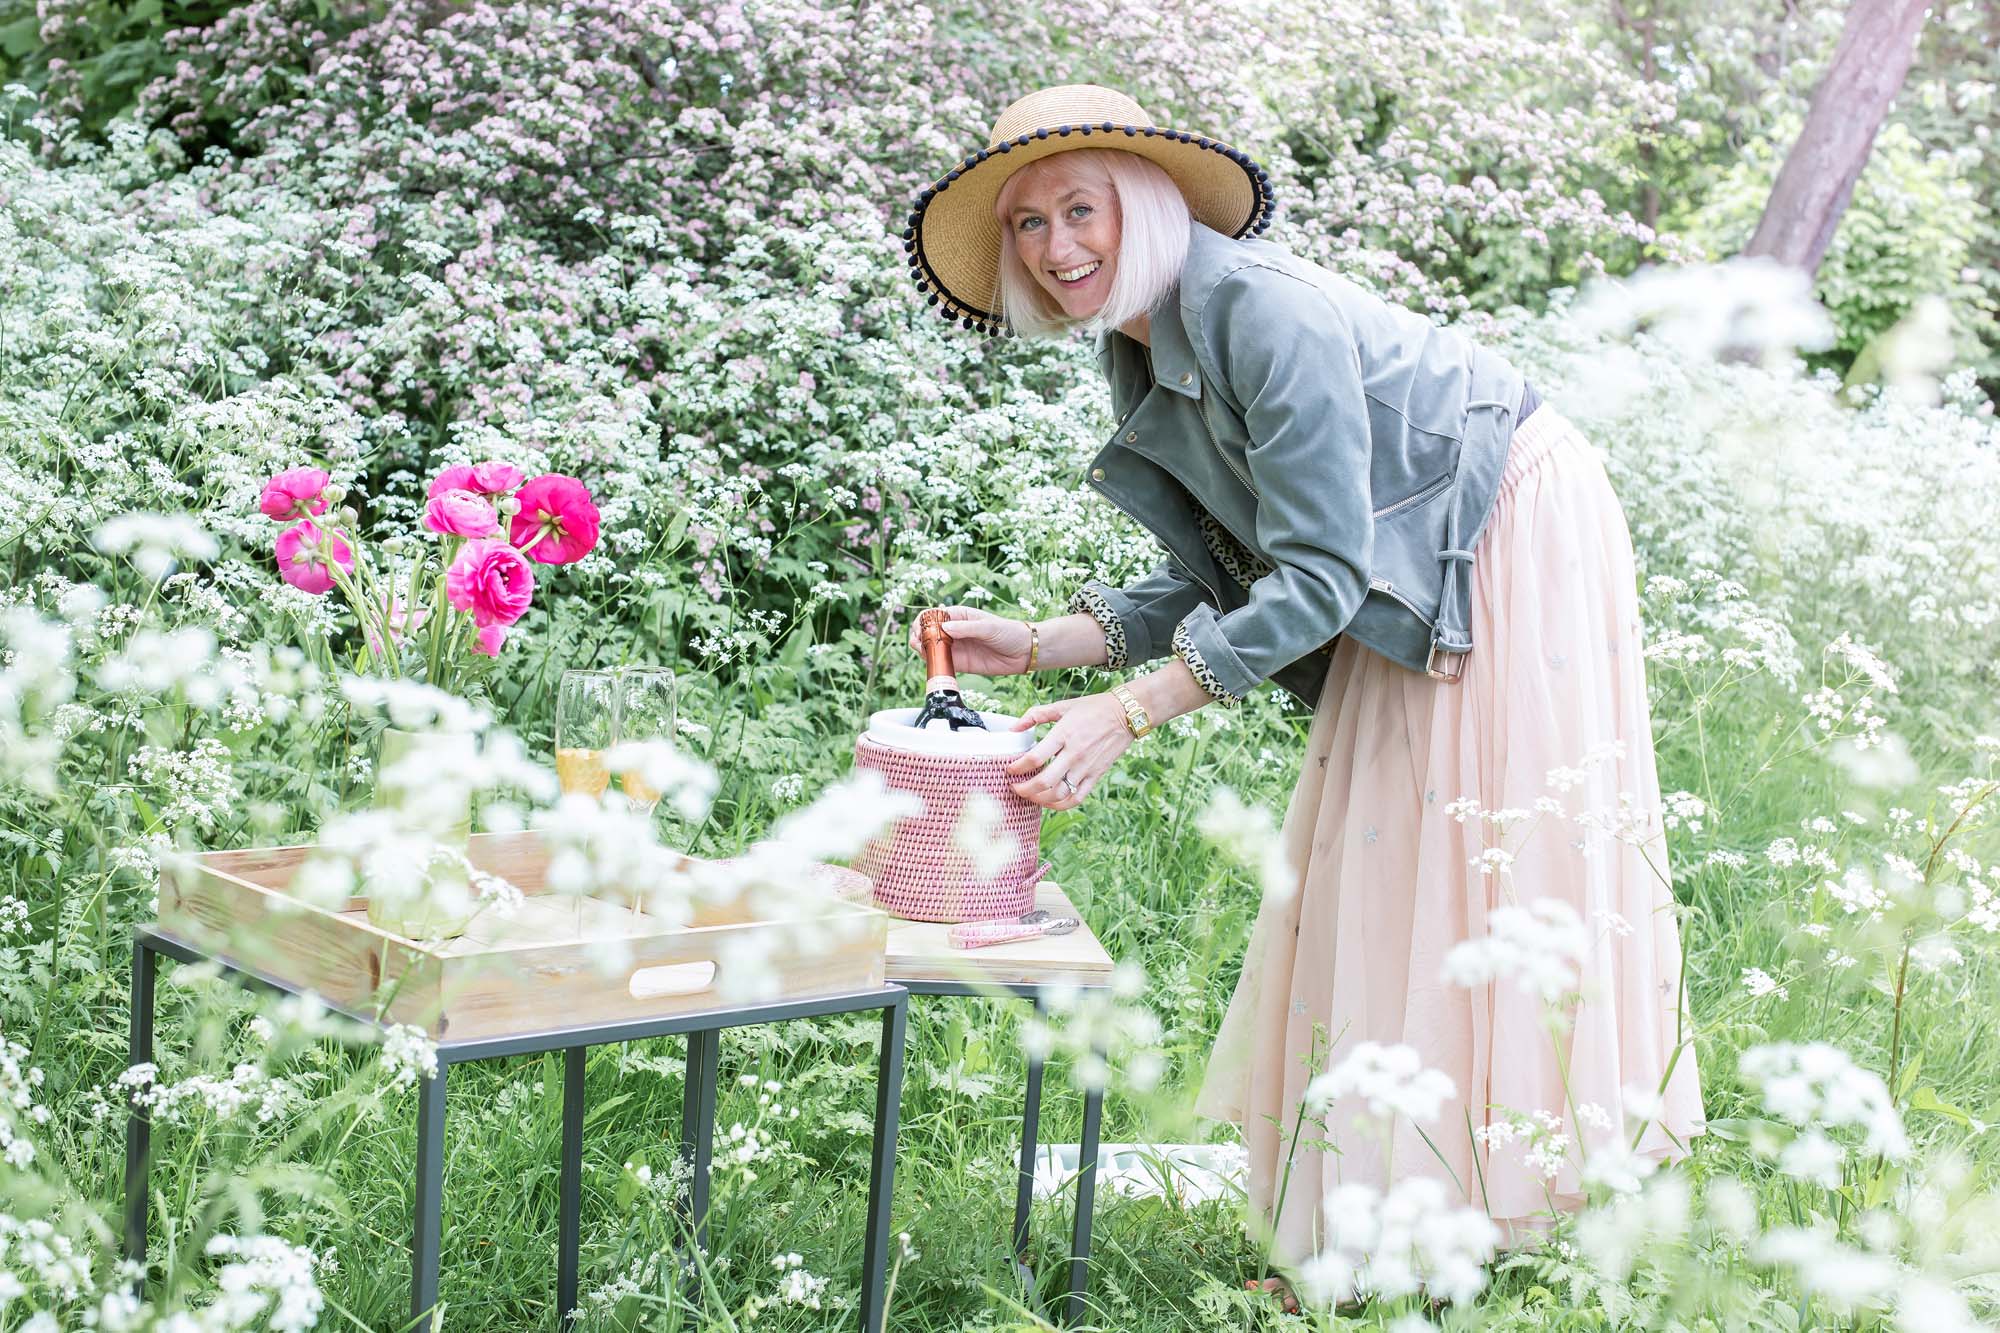 Any brand that has you serving up pink champagne is fine by me | CREDITS: Jacket, hat, tables, all QVCuk.com; ice bucket Kalinko; skirt, Hush | PHOTO: Jane Looker Photography